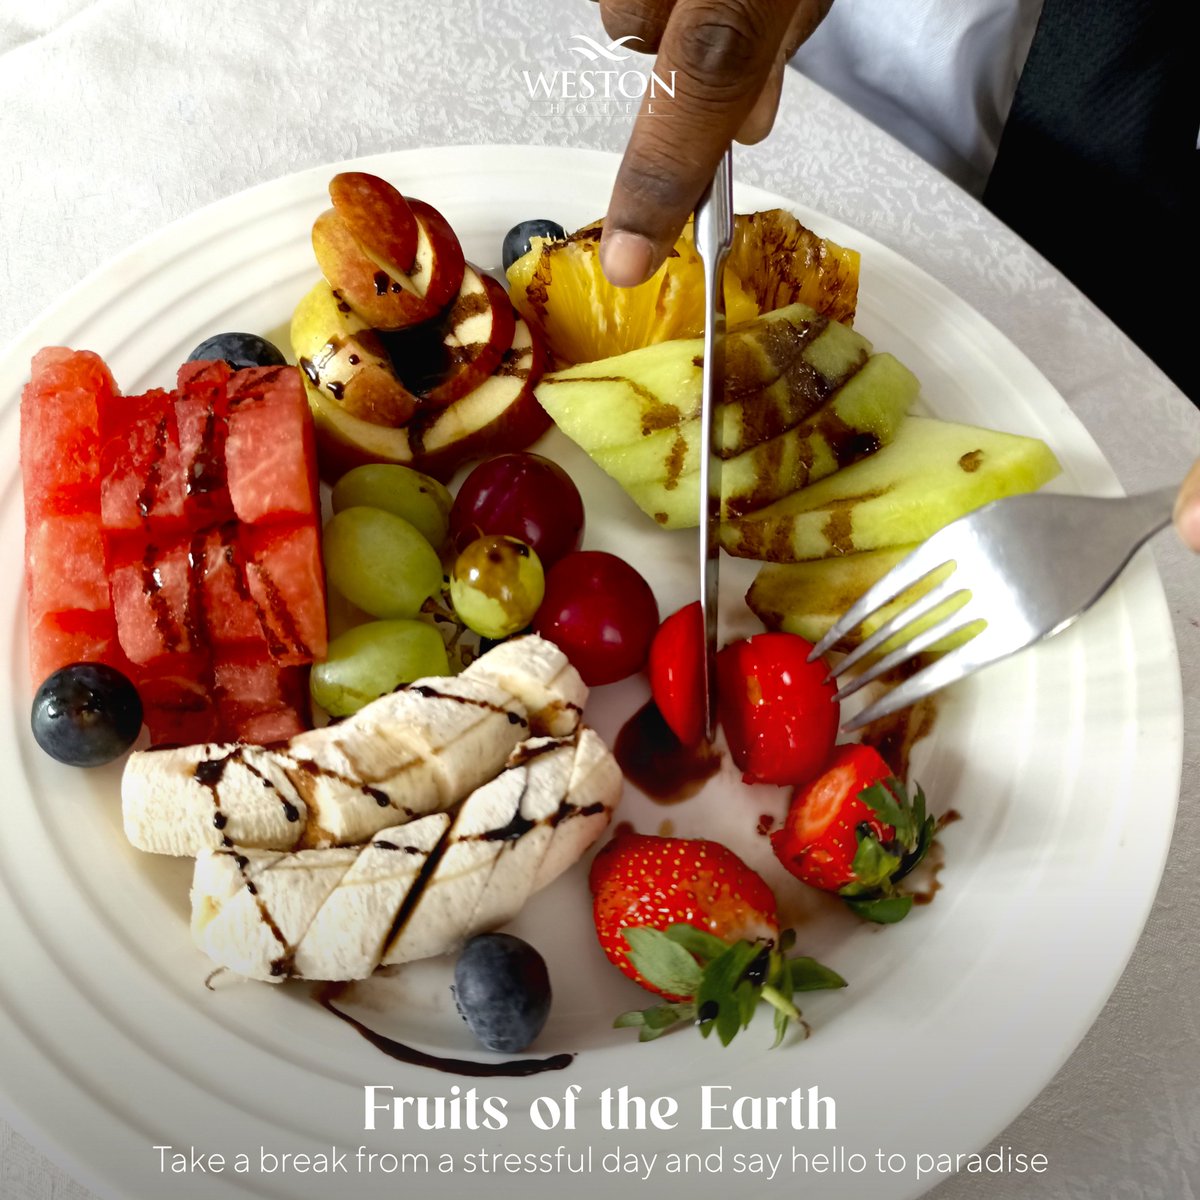 Serving up farm fresh fruits as you snack away between important meetings at The Weston Hotel, Nairobi.
.
.
.
.
#fruitsalad #nutritiousanddelicious #snacking